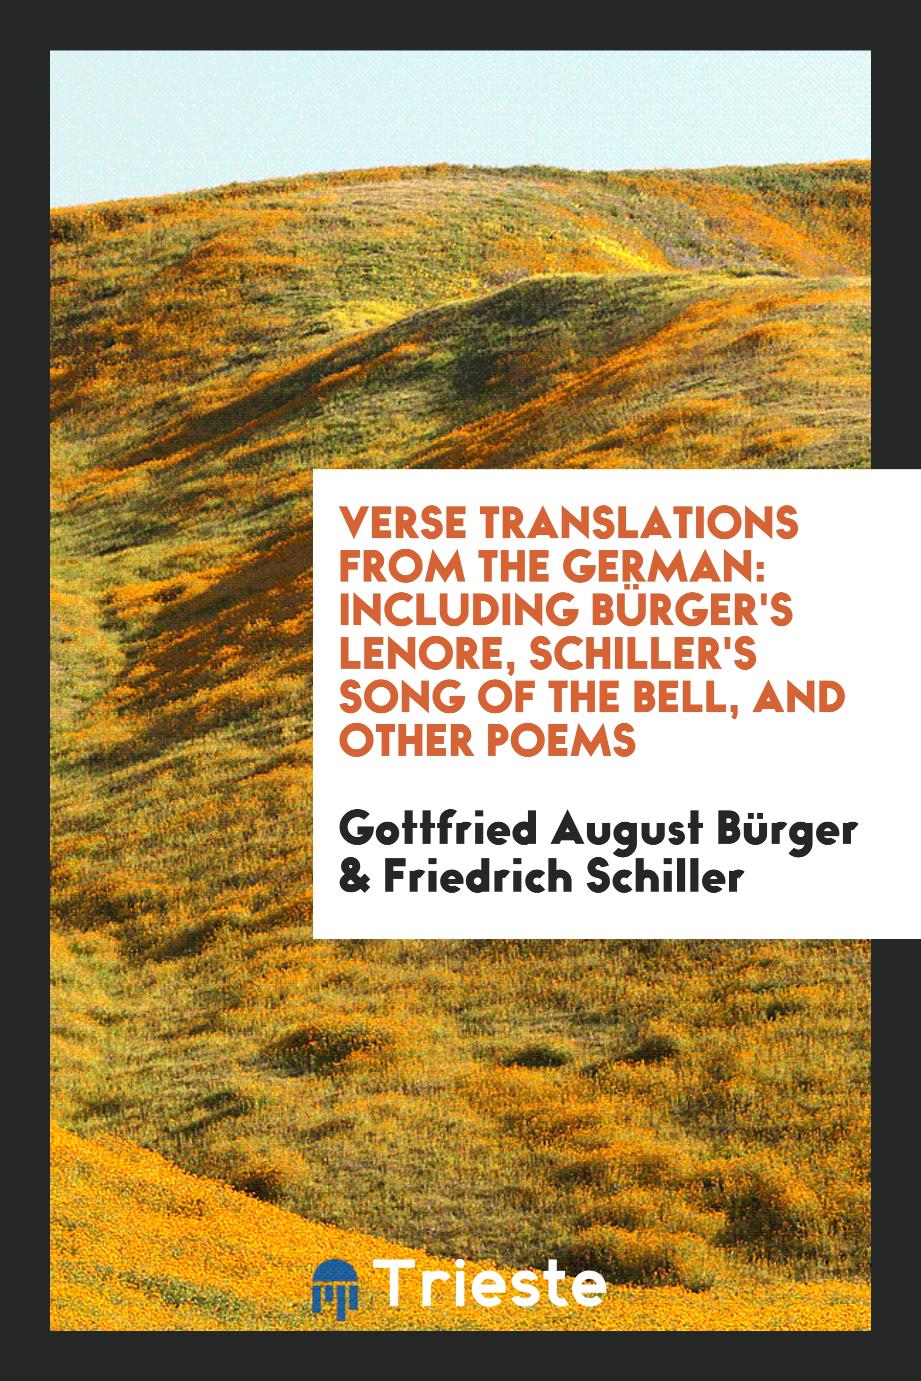 Verse Translations from the German: Including Bürger's Lenore, Schiller's Song of the Bell, and Other Poems